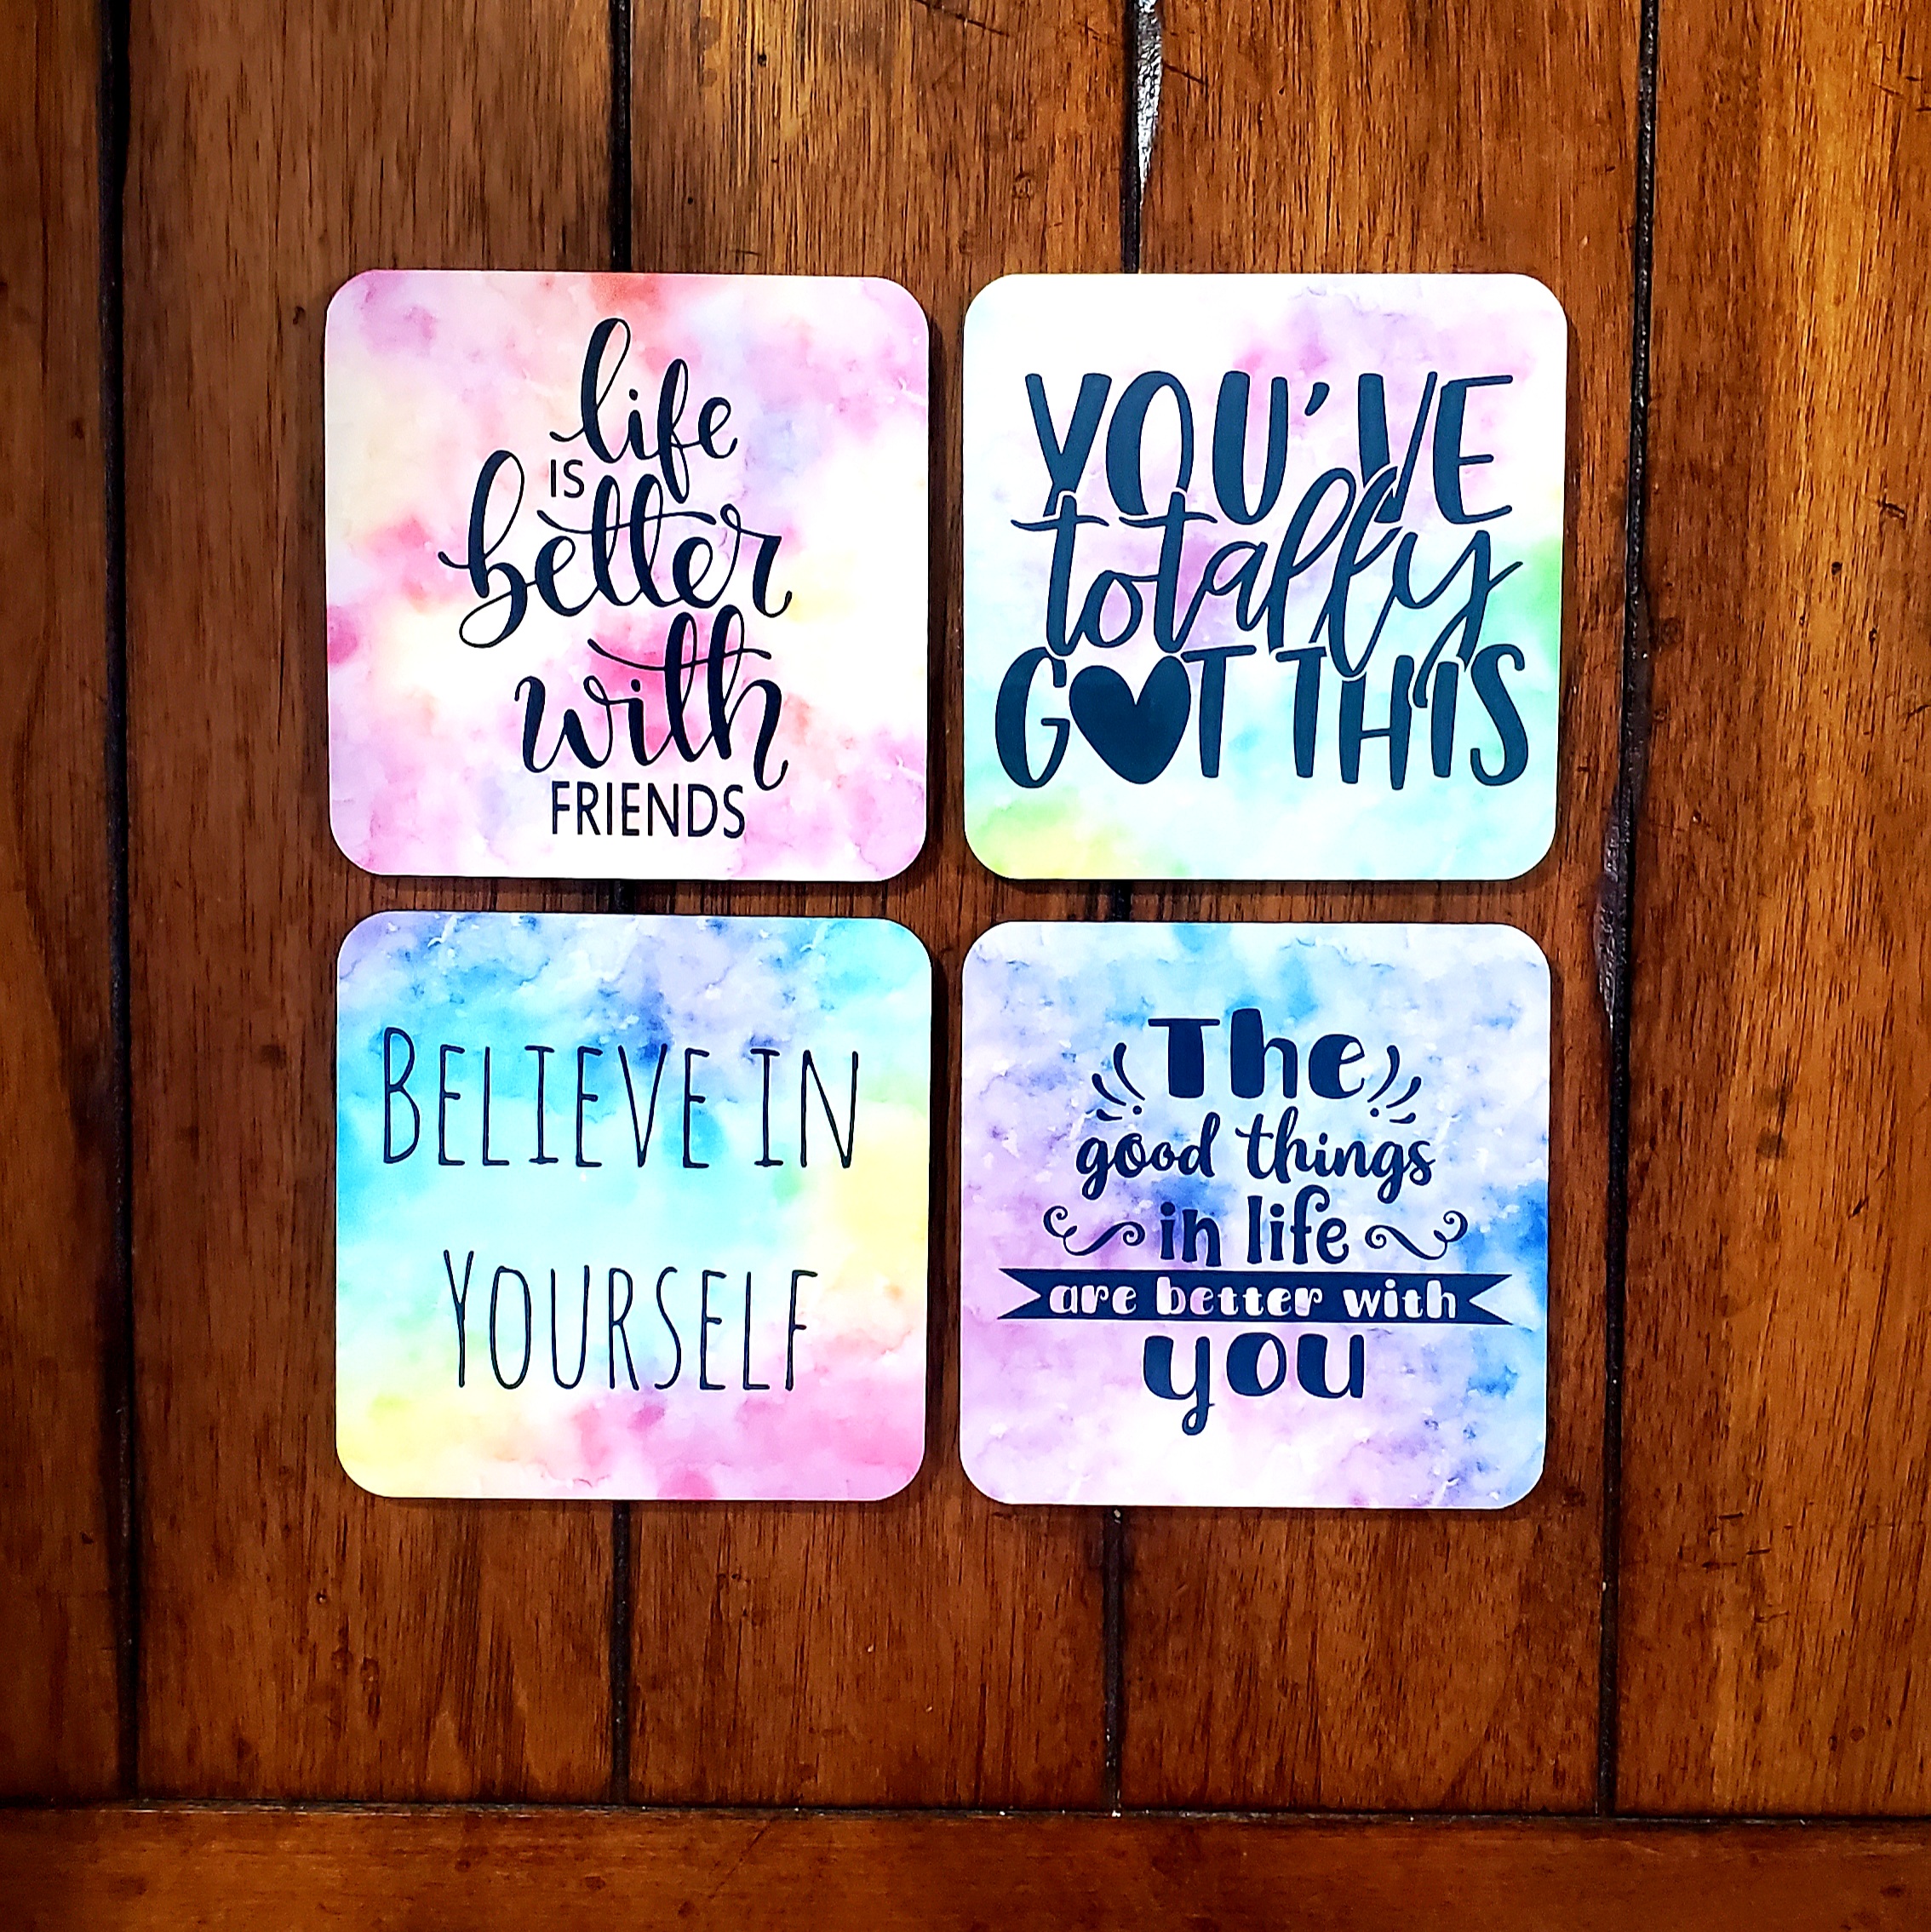 Watercolor House Coasters made with sublimation printing